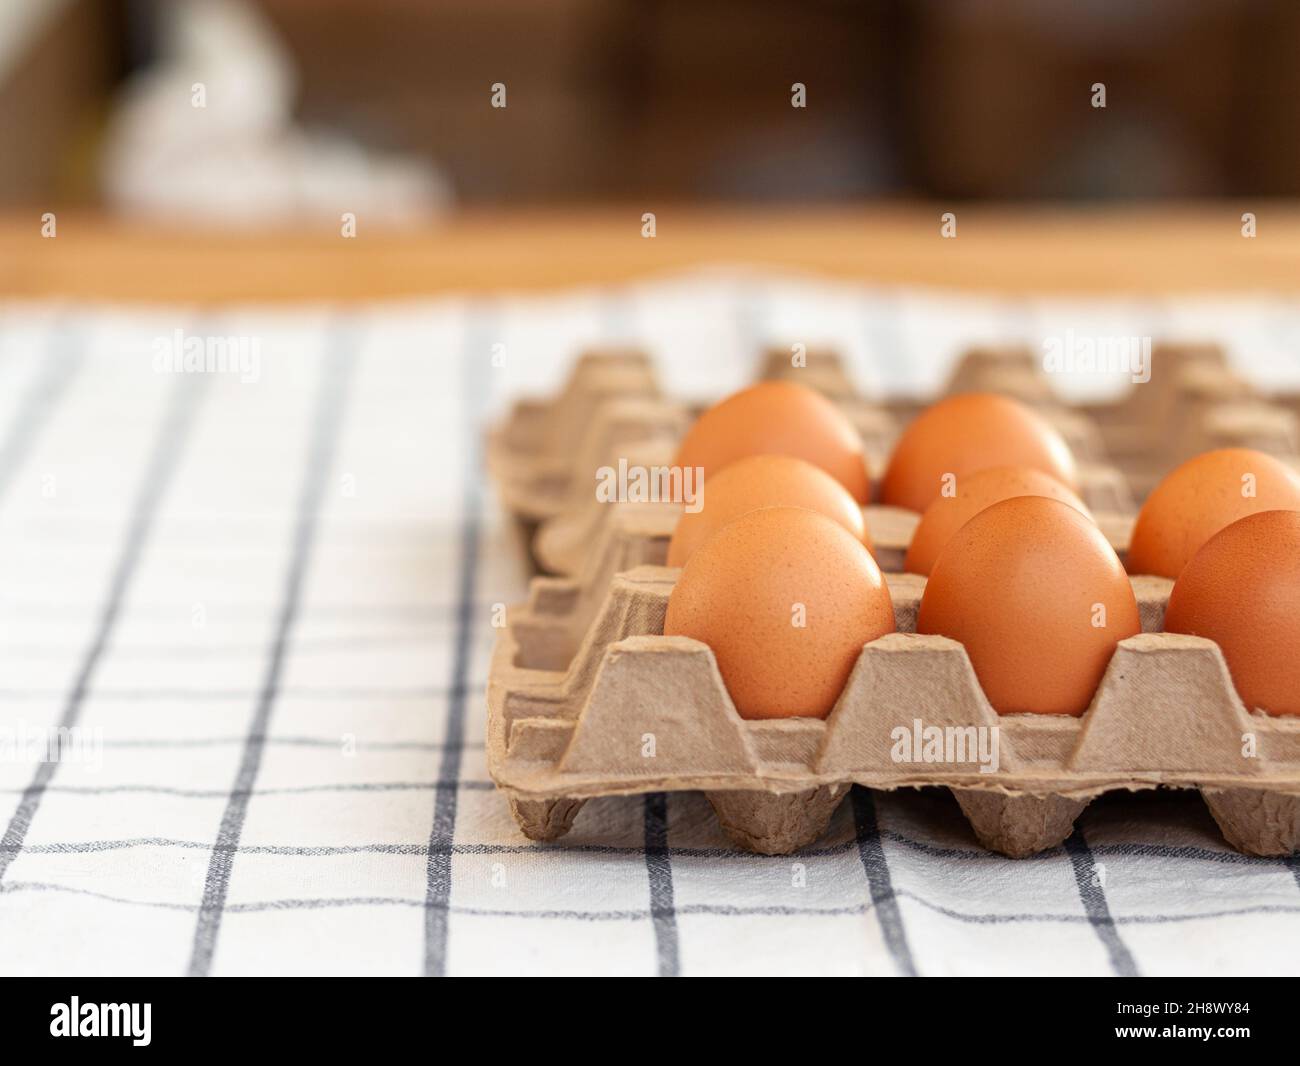 Few brown eggs among the cells of a large cardboard bag, chicken egg as a valuable nutritious product, a tray for carrying and storing fragile eggs. N Stock Photo